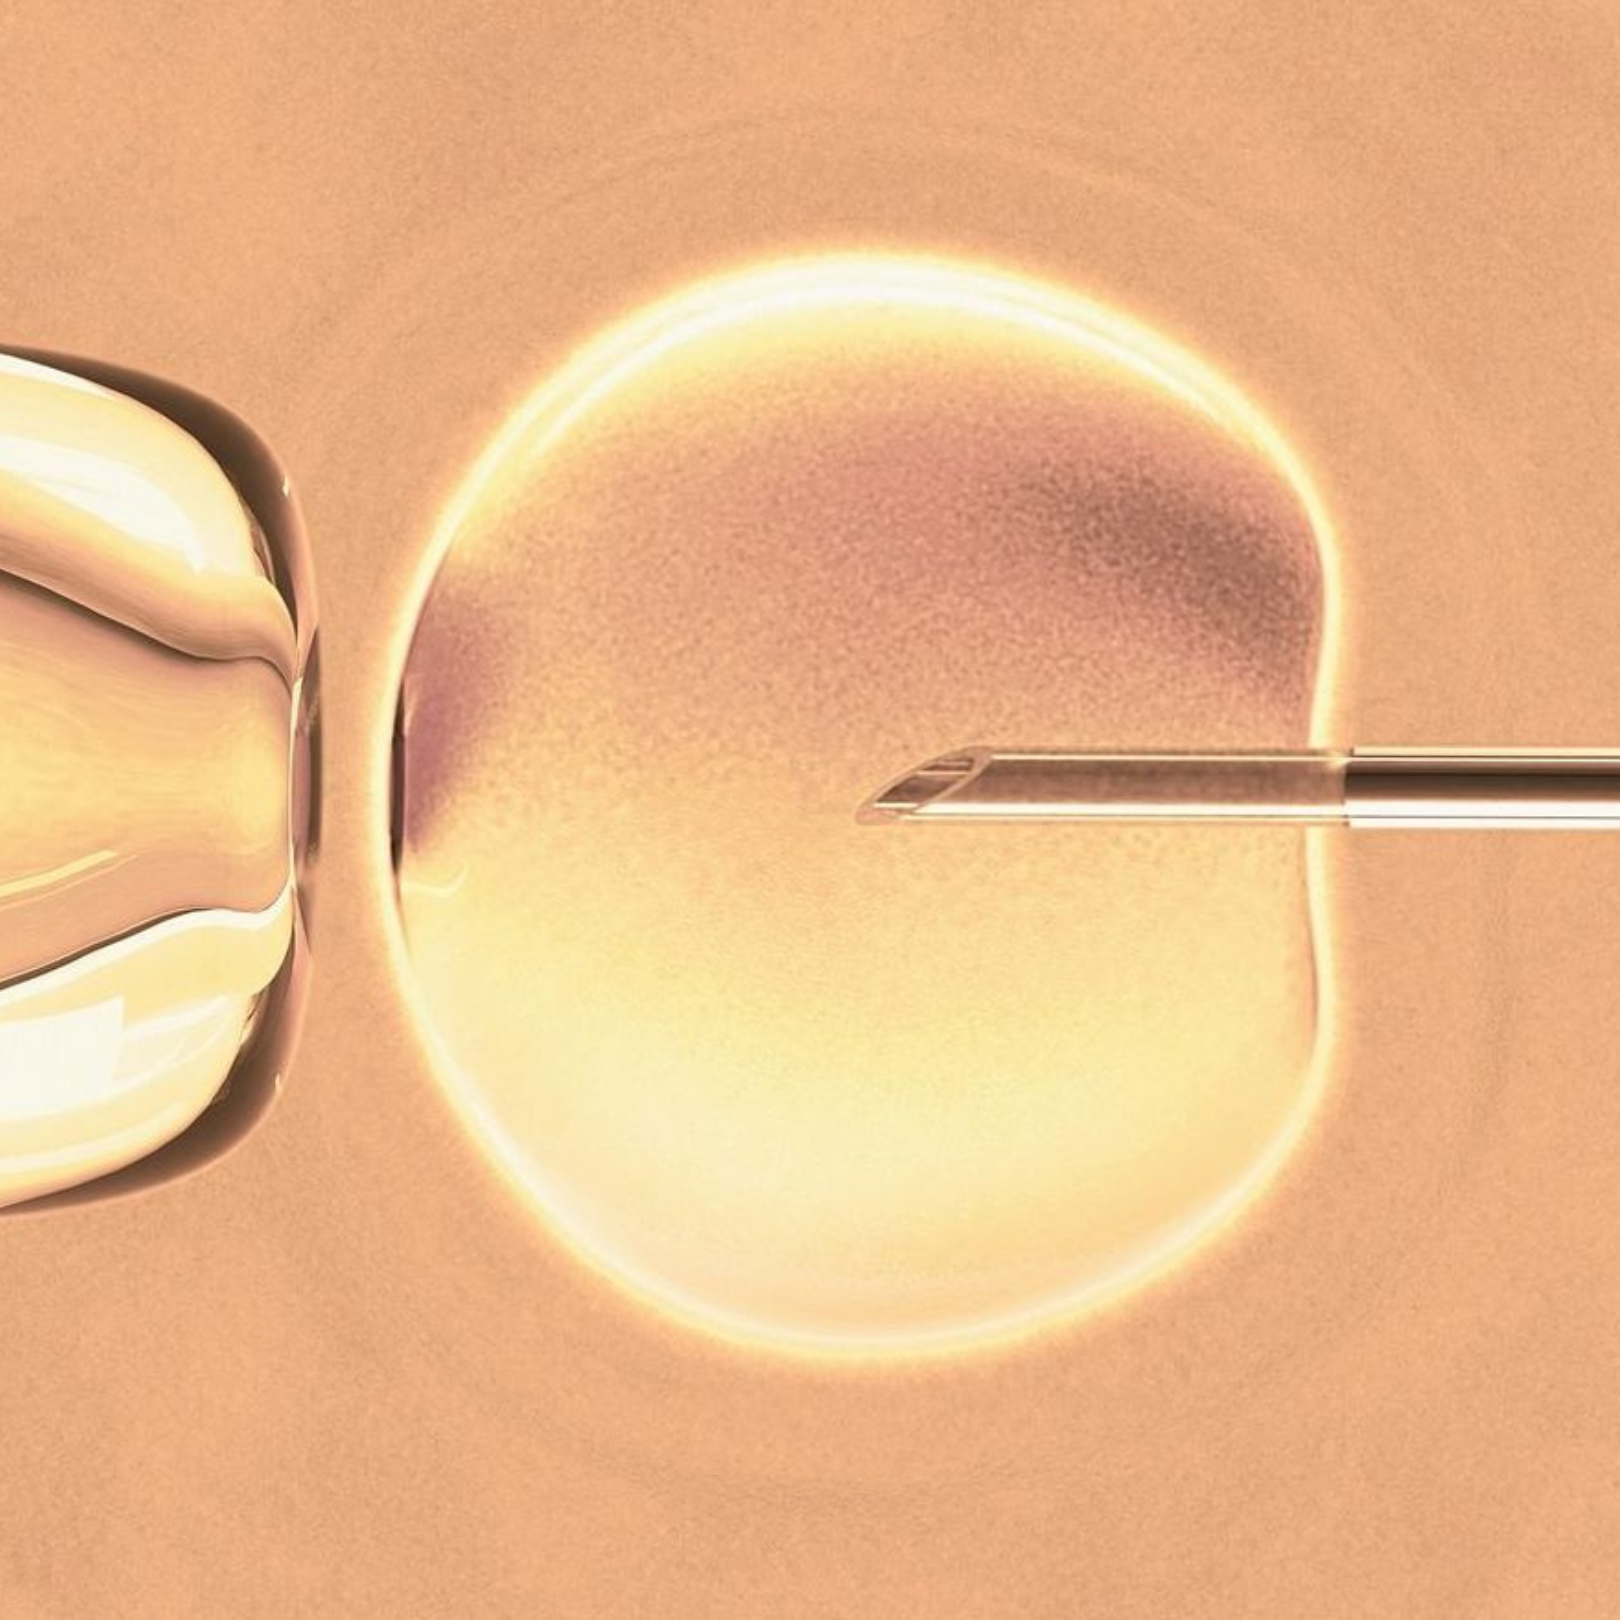 Fertility Treatment Options: greater choice and transparency required